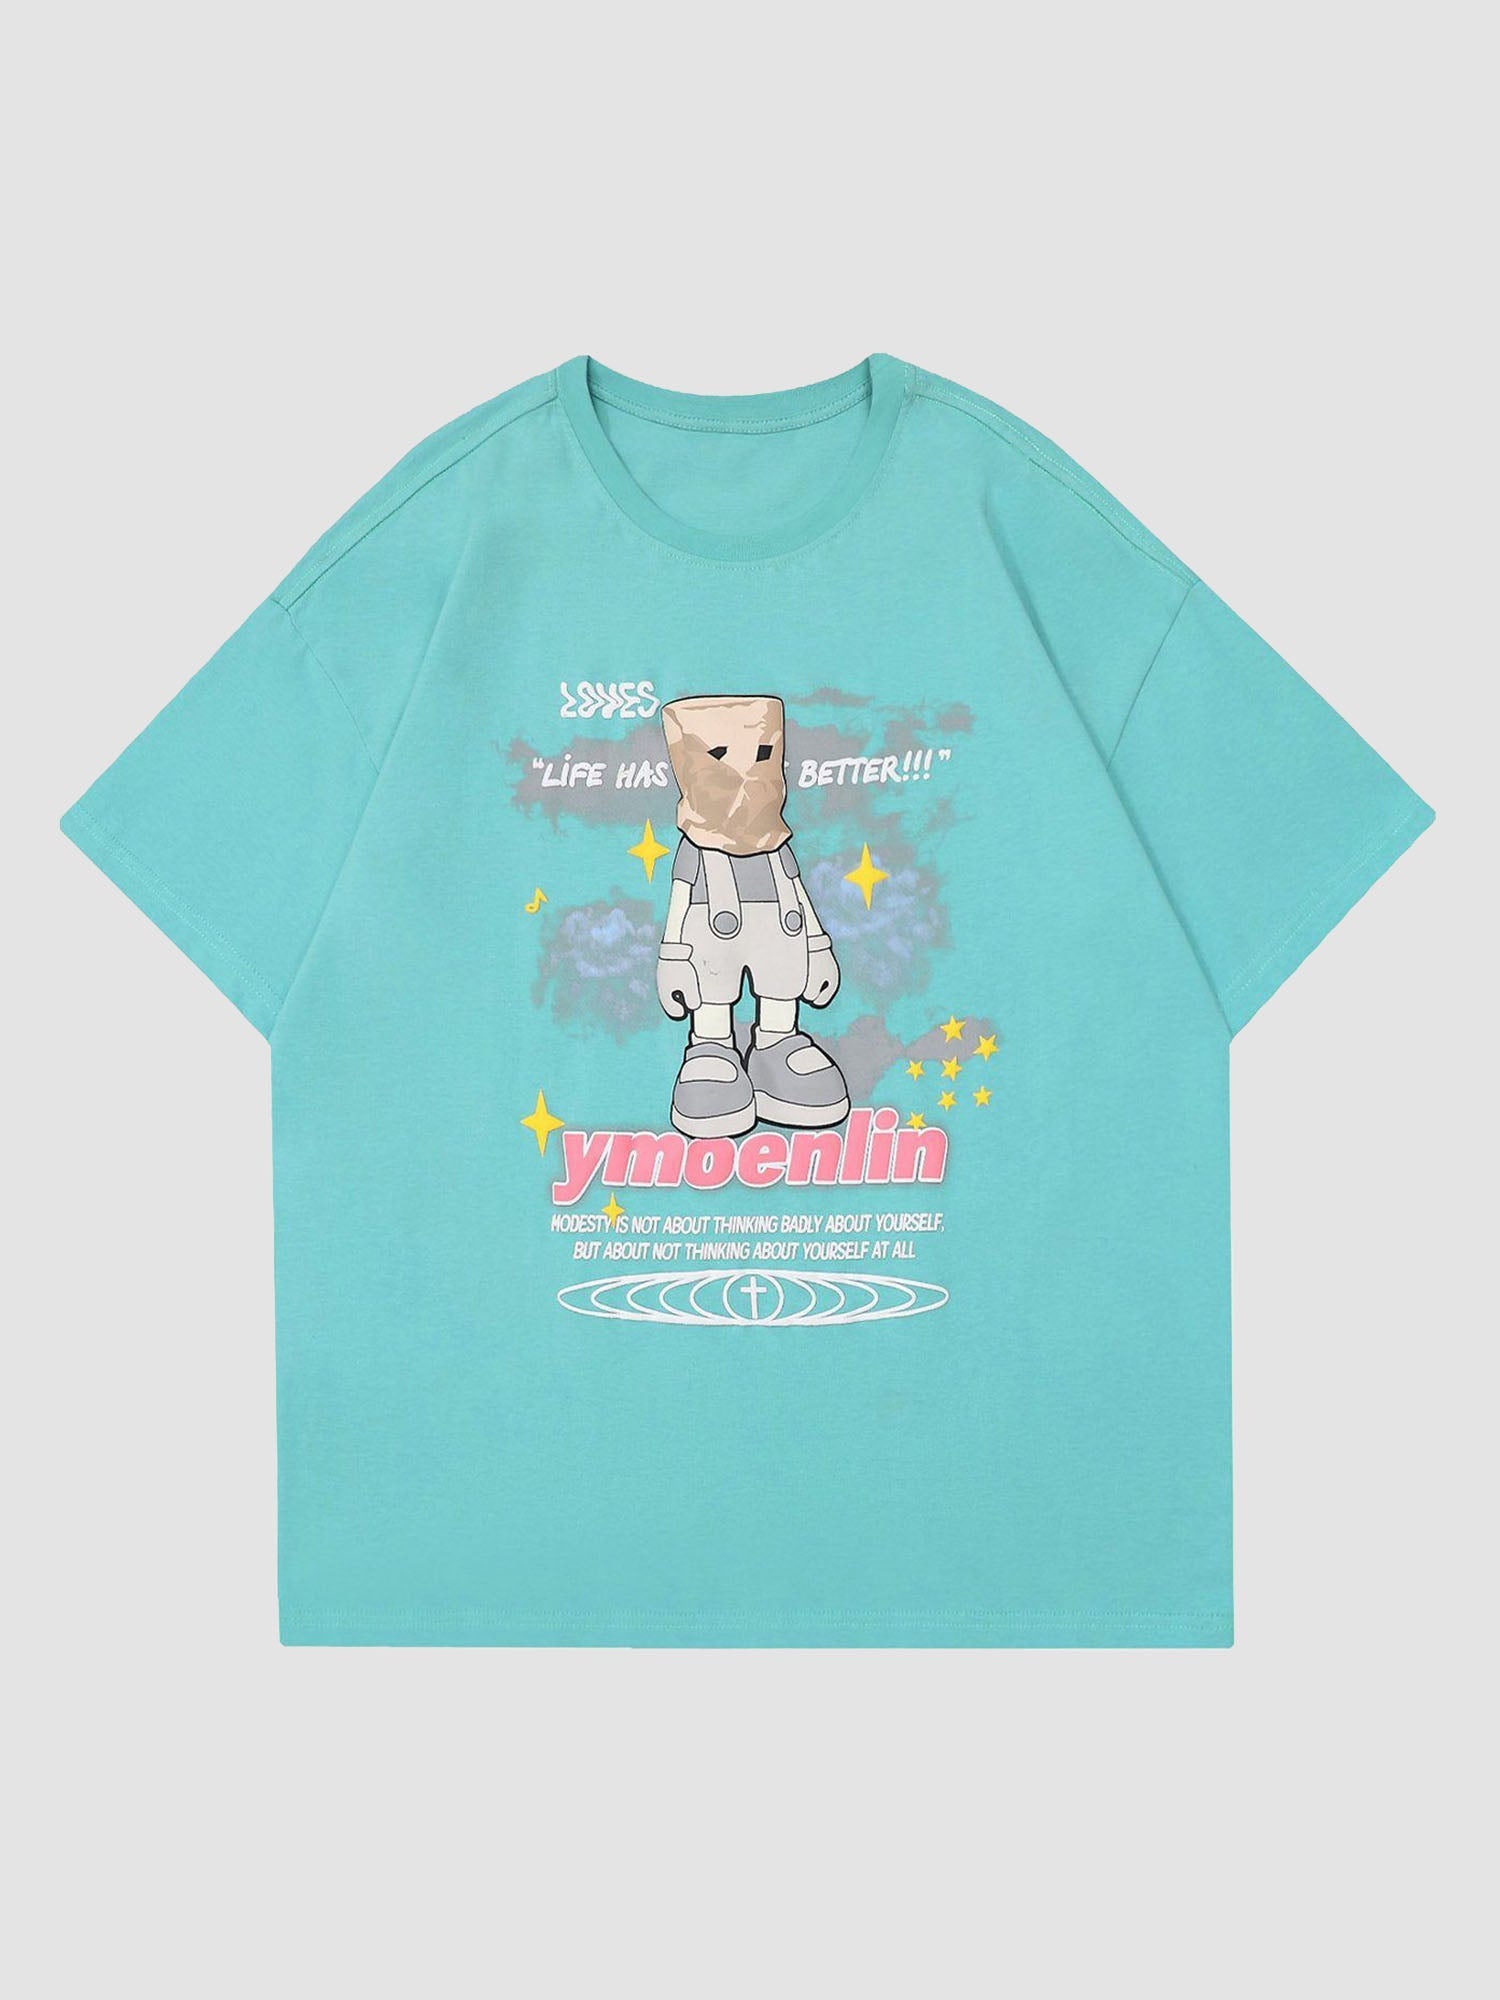 JUSTNOTAG Robot Wearing A Garbage Cover Short Sleeve Tee